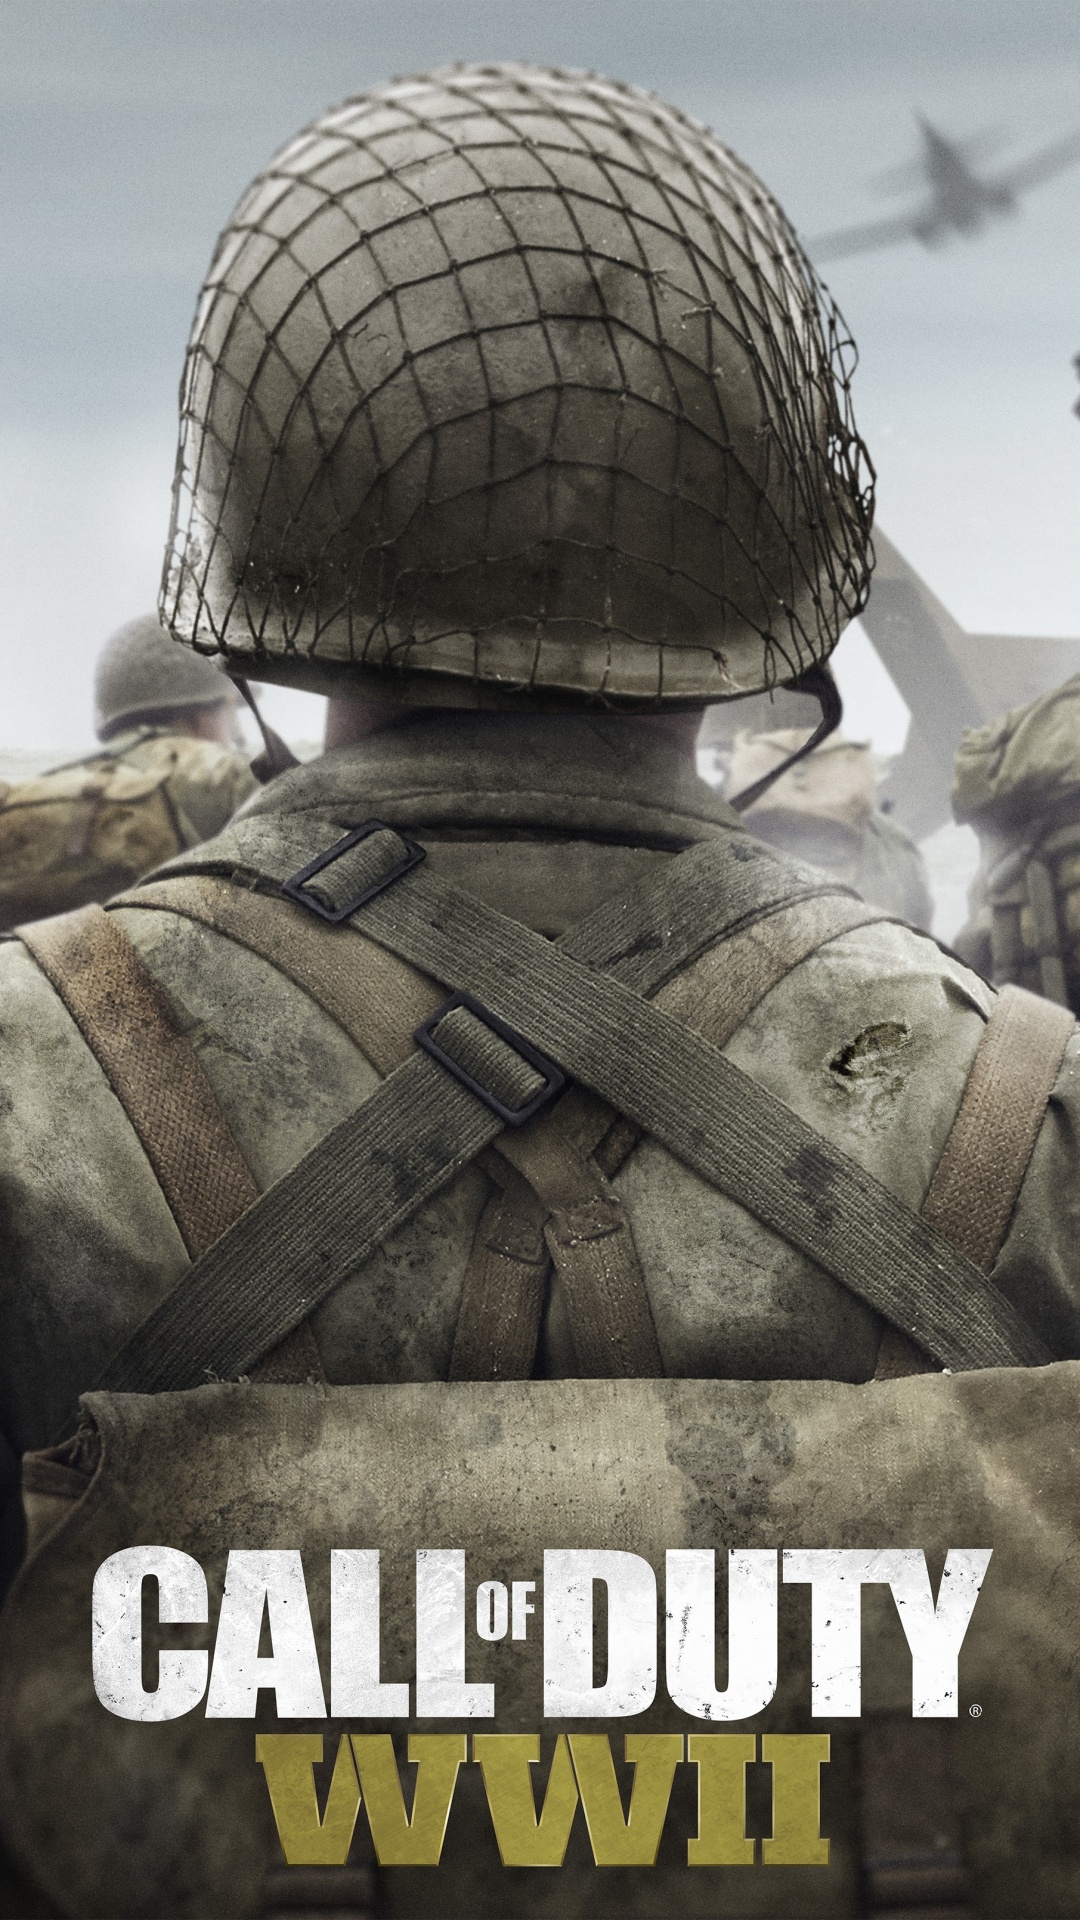 Call of Duty Ww2, Call of Duty WWII, Activision, Sledgehammer Games, Soldat. Wallpaper in 1080x1920 Resolution